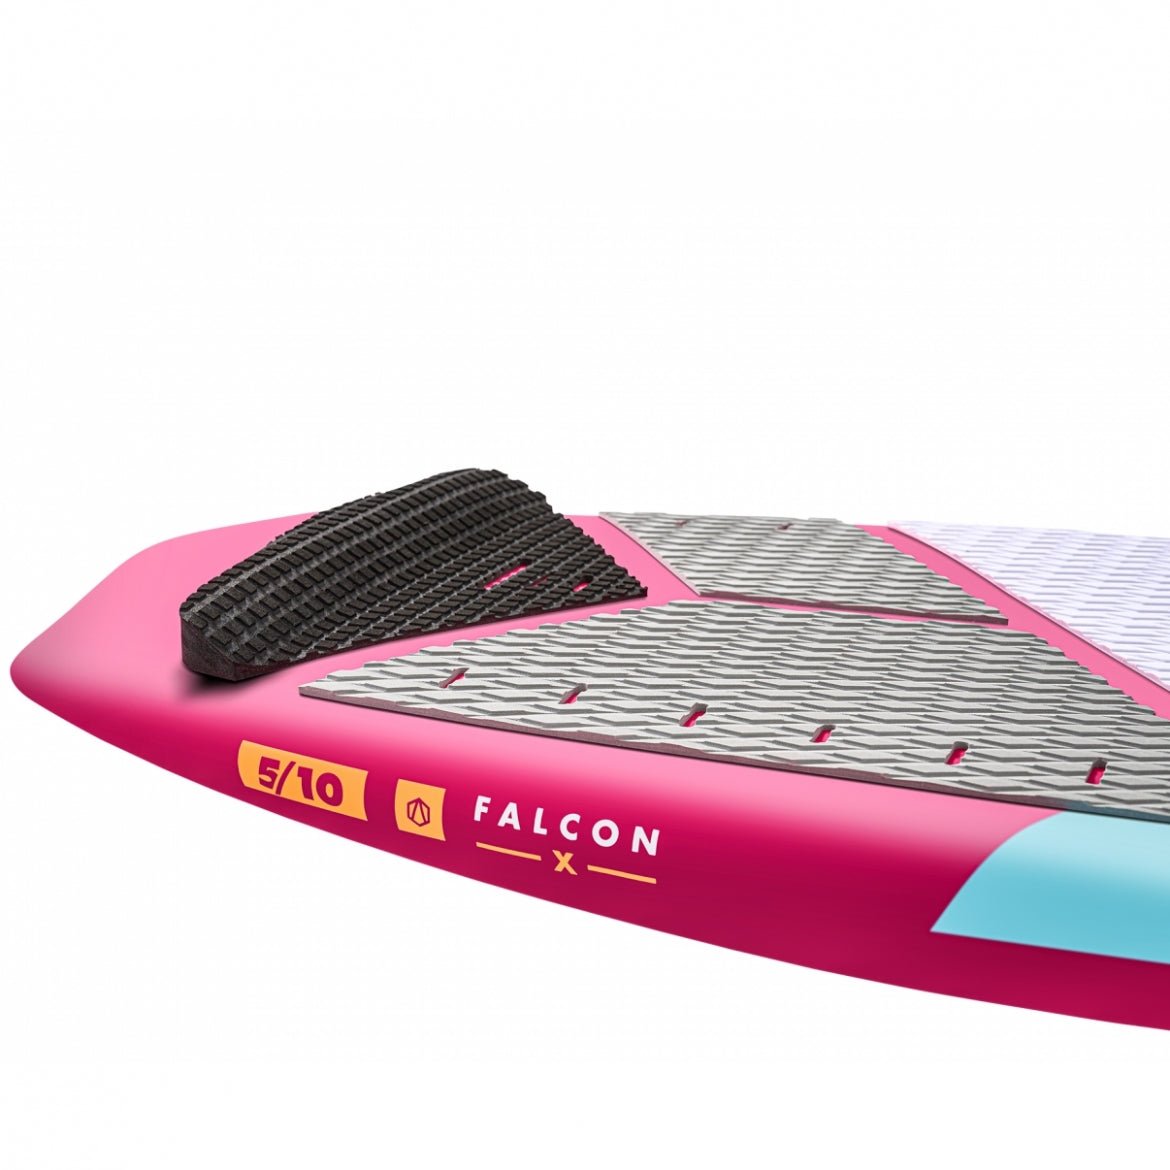 Aztron FALCON Carbon X 5'10 - Worthing Watersports - Wing Foil Boards - Aztron